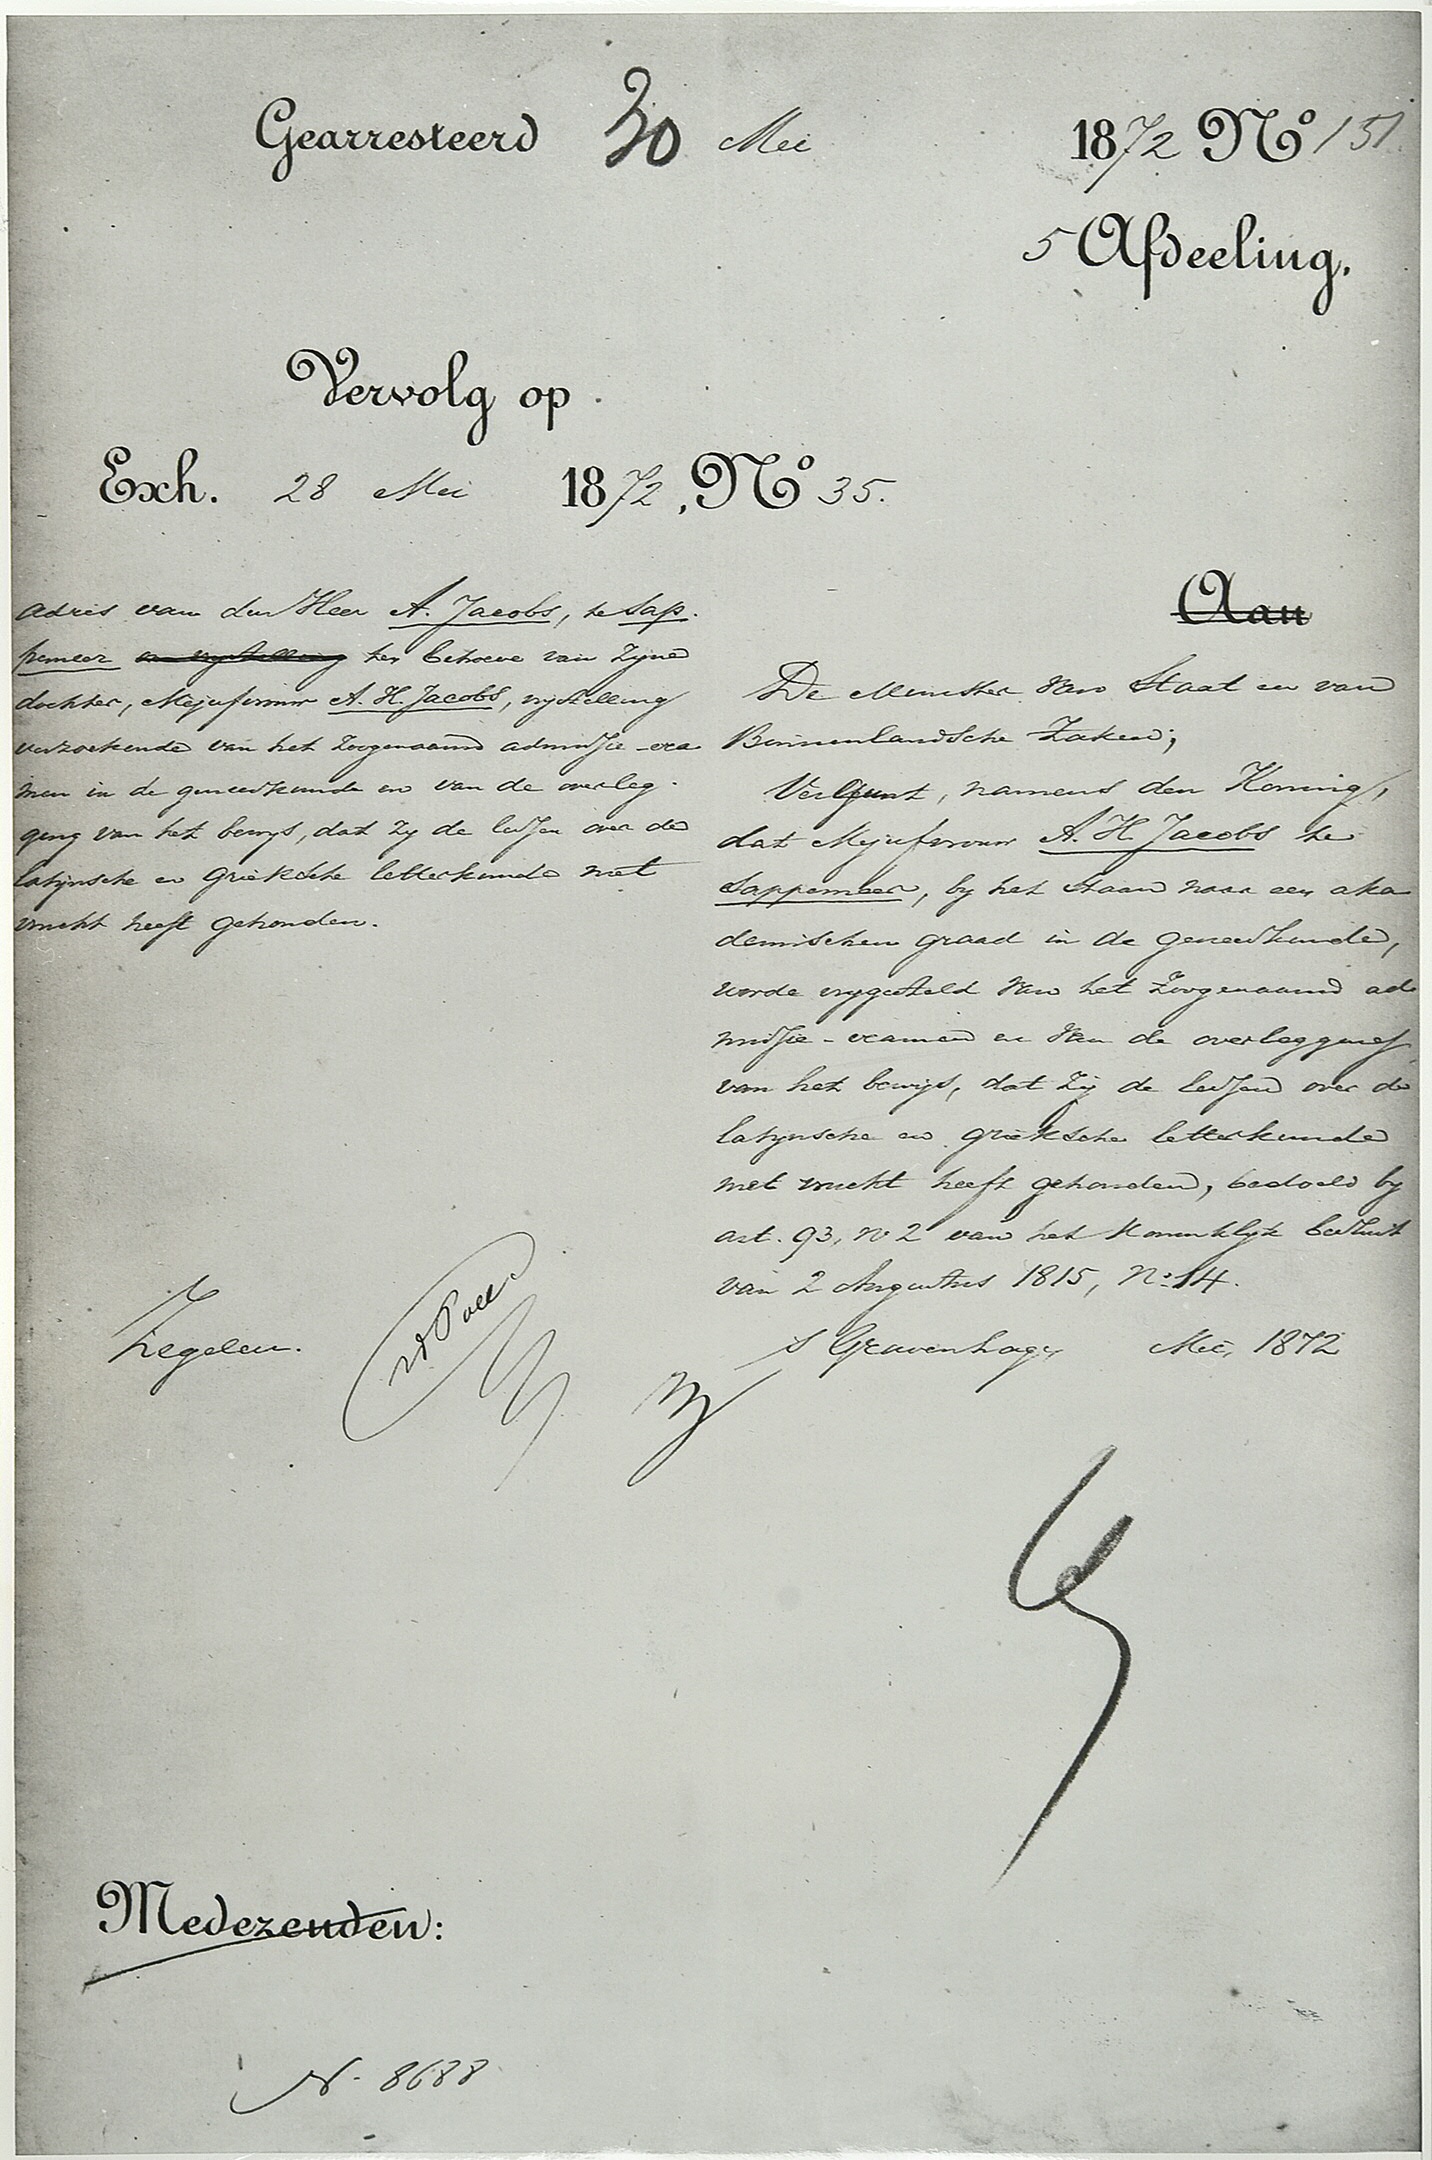 THorbecke's permission. Source: Aletta Jacobs room, University Museum